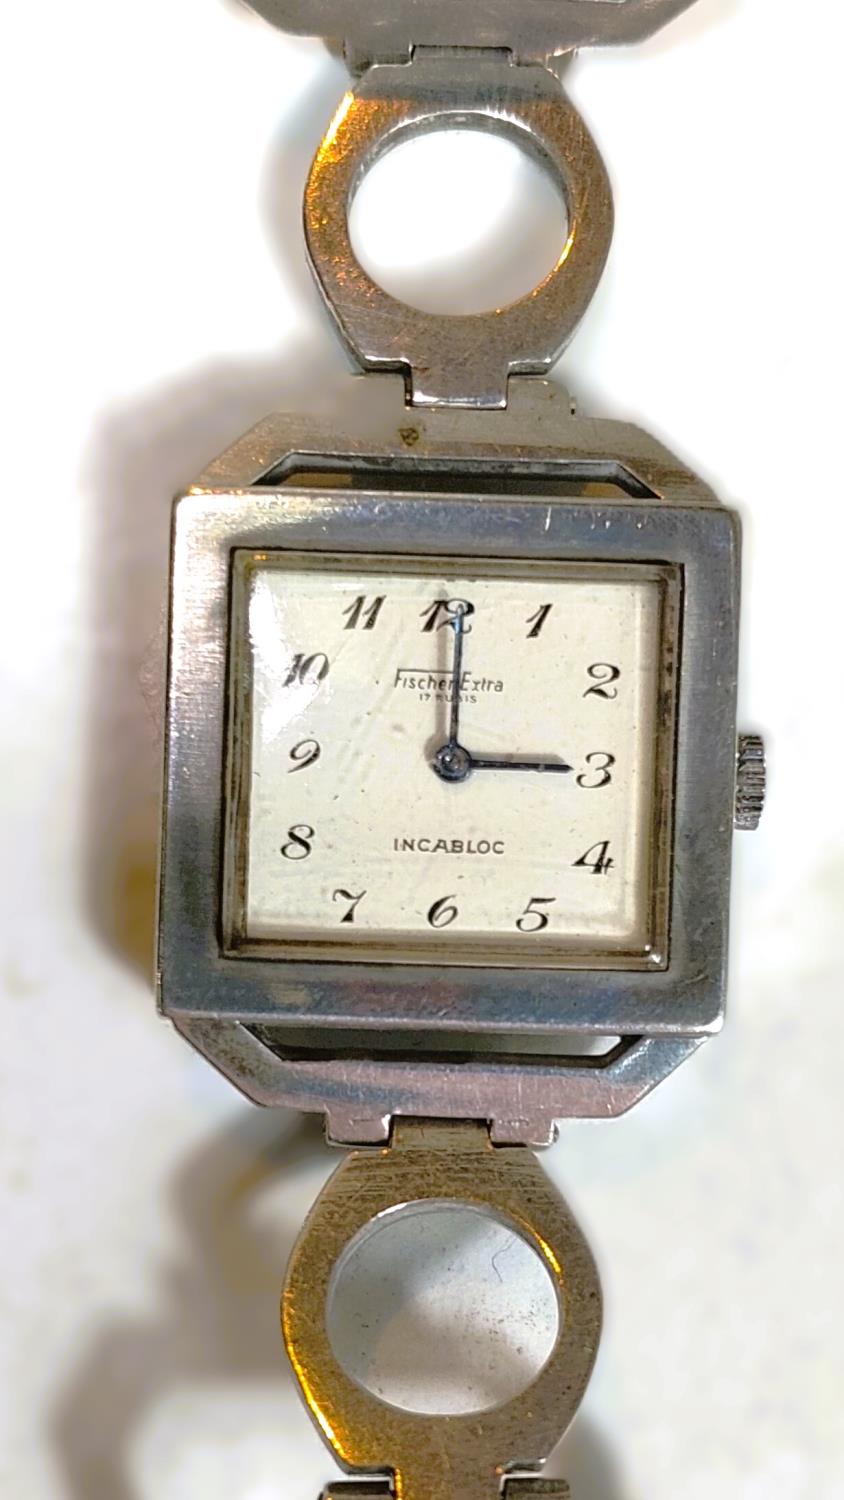 A 1970 Fisher Extra white metal watch in the manor of Roy King, loop bracelet - Image 2 of 6